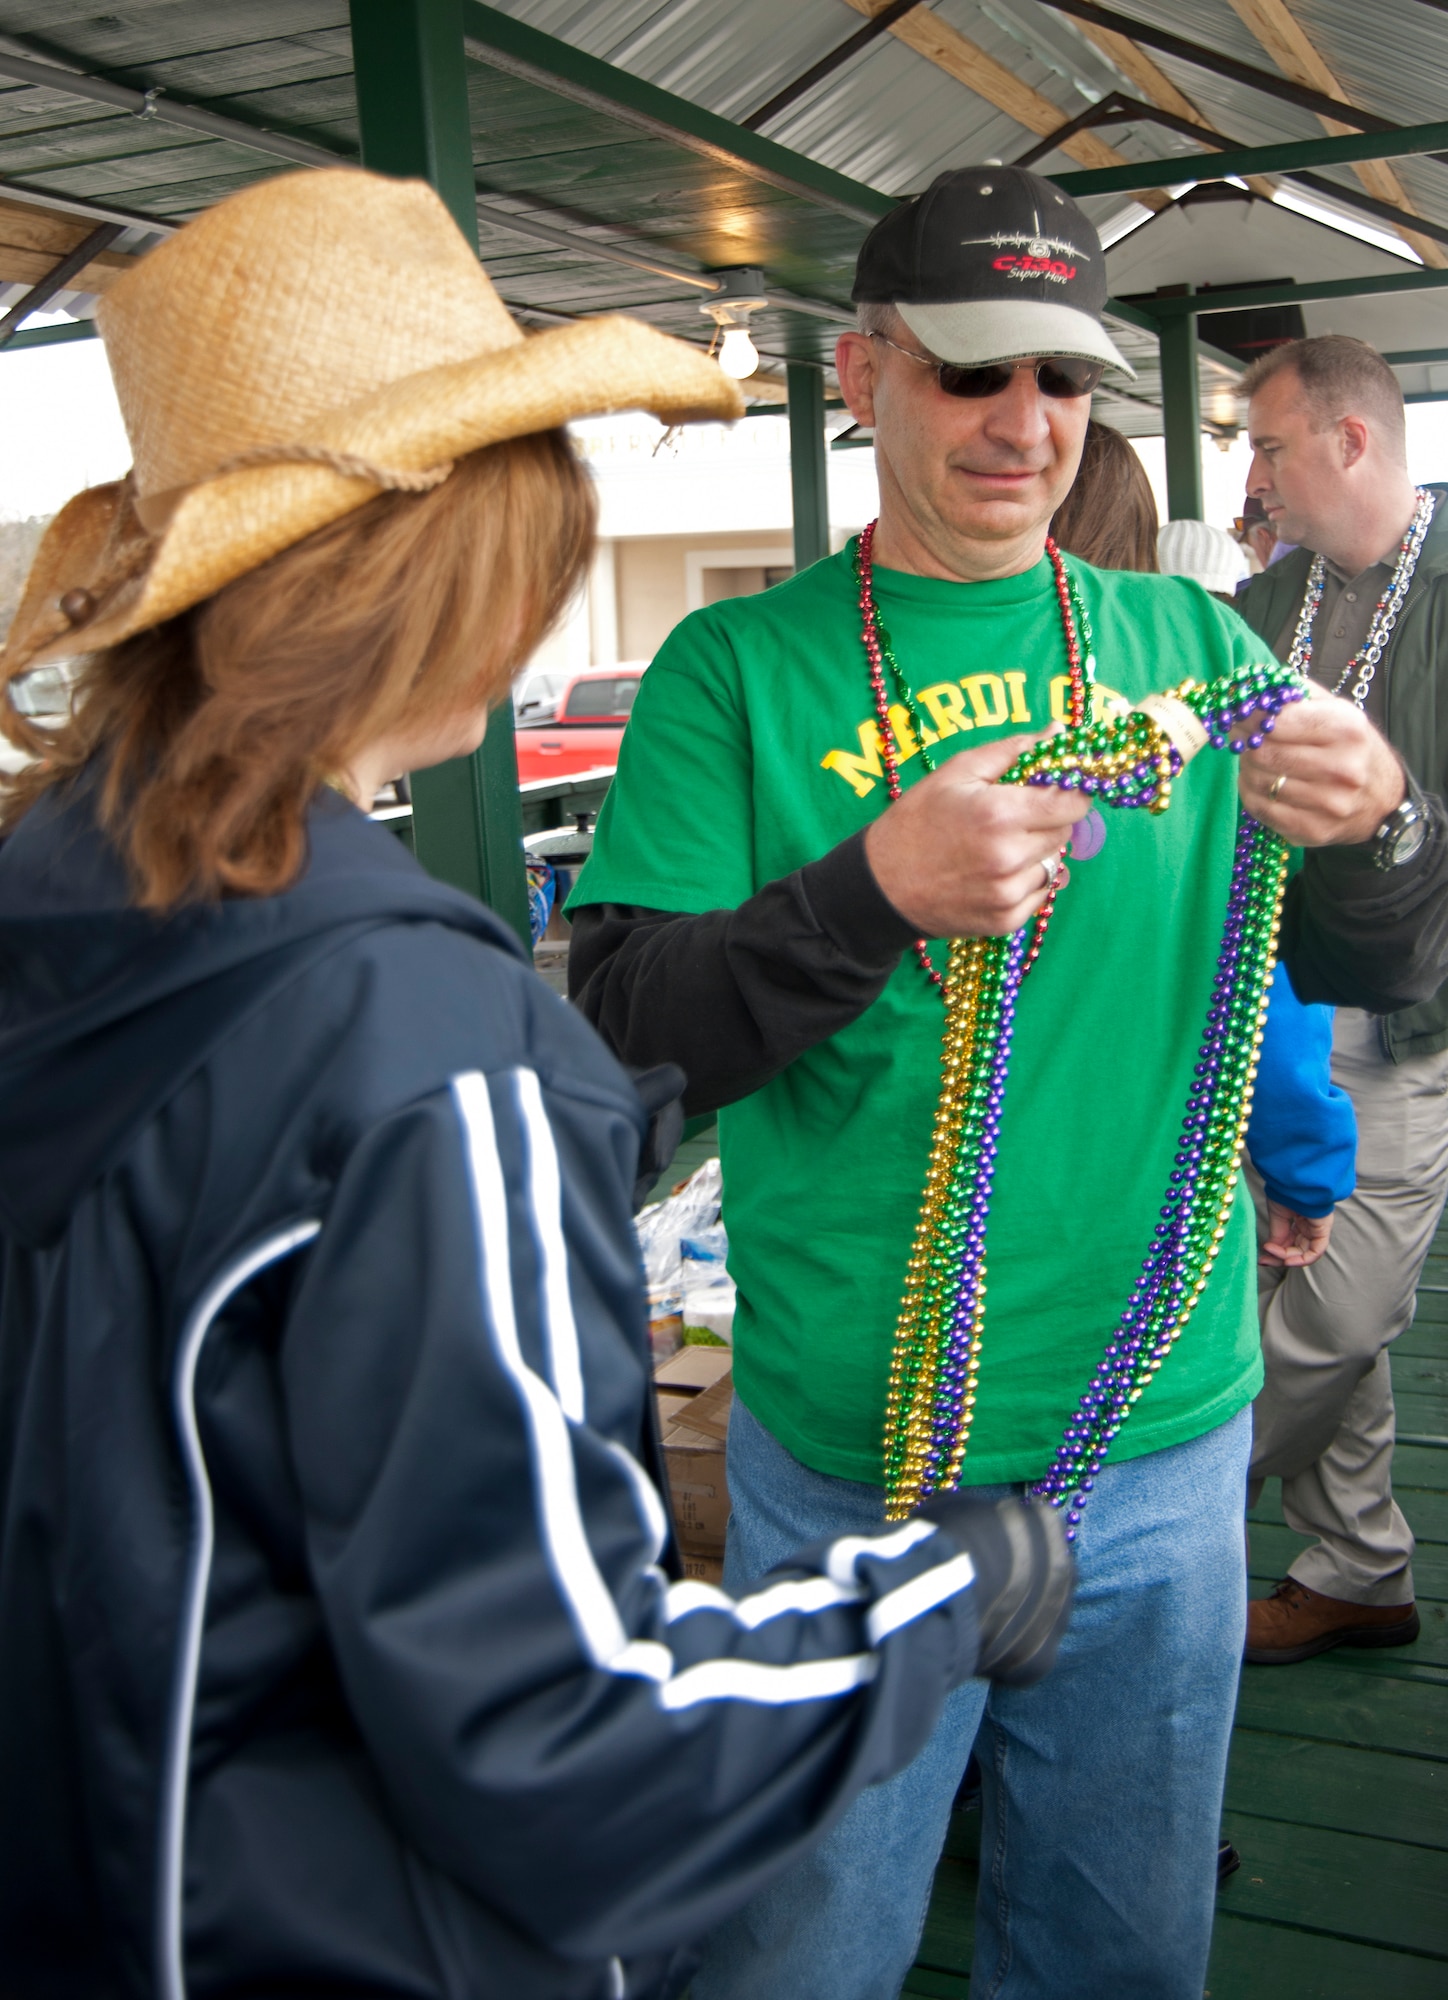 Brig. Gen. James Muscatell, 403rd Wing commander and his wife, Nancy, sort beads on the City of D'Iberville's float before the annual Mardi Gras parade kicked off March 6 in D'Iberville, Miss.  General and Mrs. Muscatell were asked by the city to represent the 403rd Wing, Keesler Air Force Base, Miss.  (U.S. Air Force photo by Tech. Sgt. Tanya King)